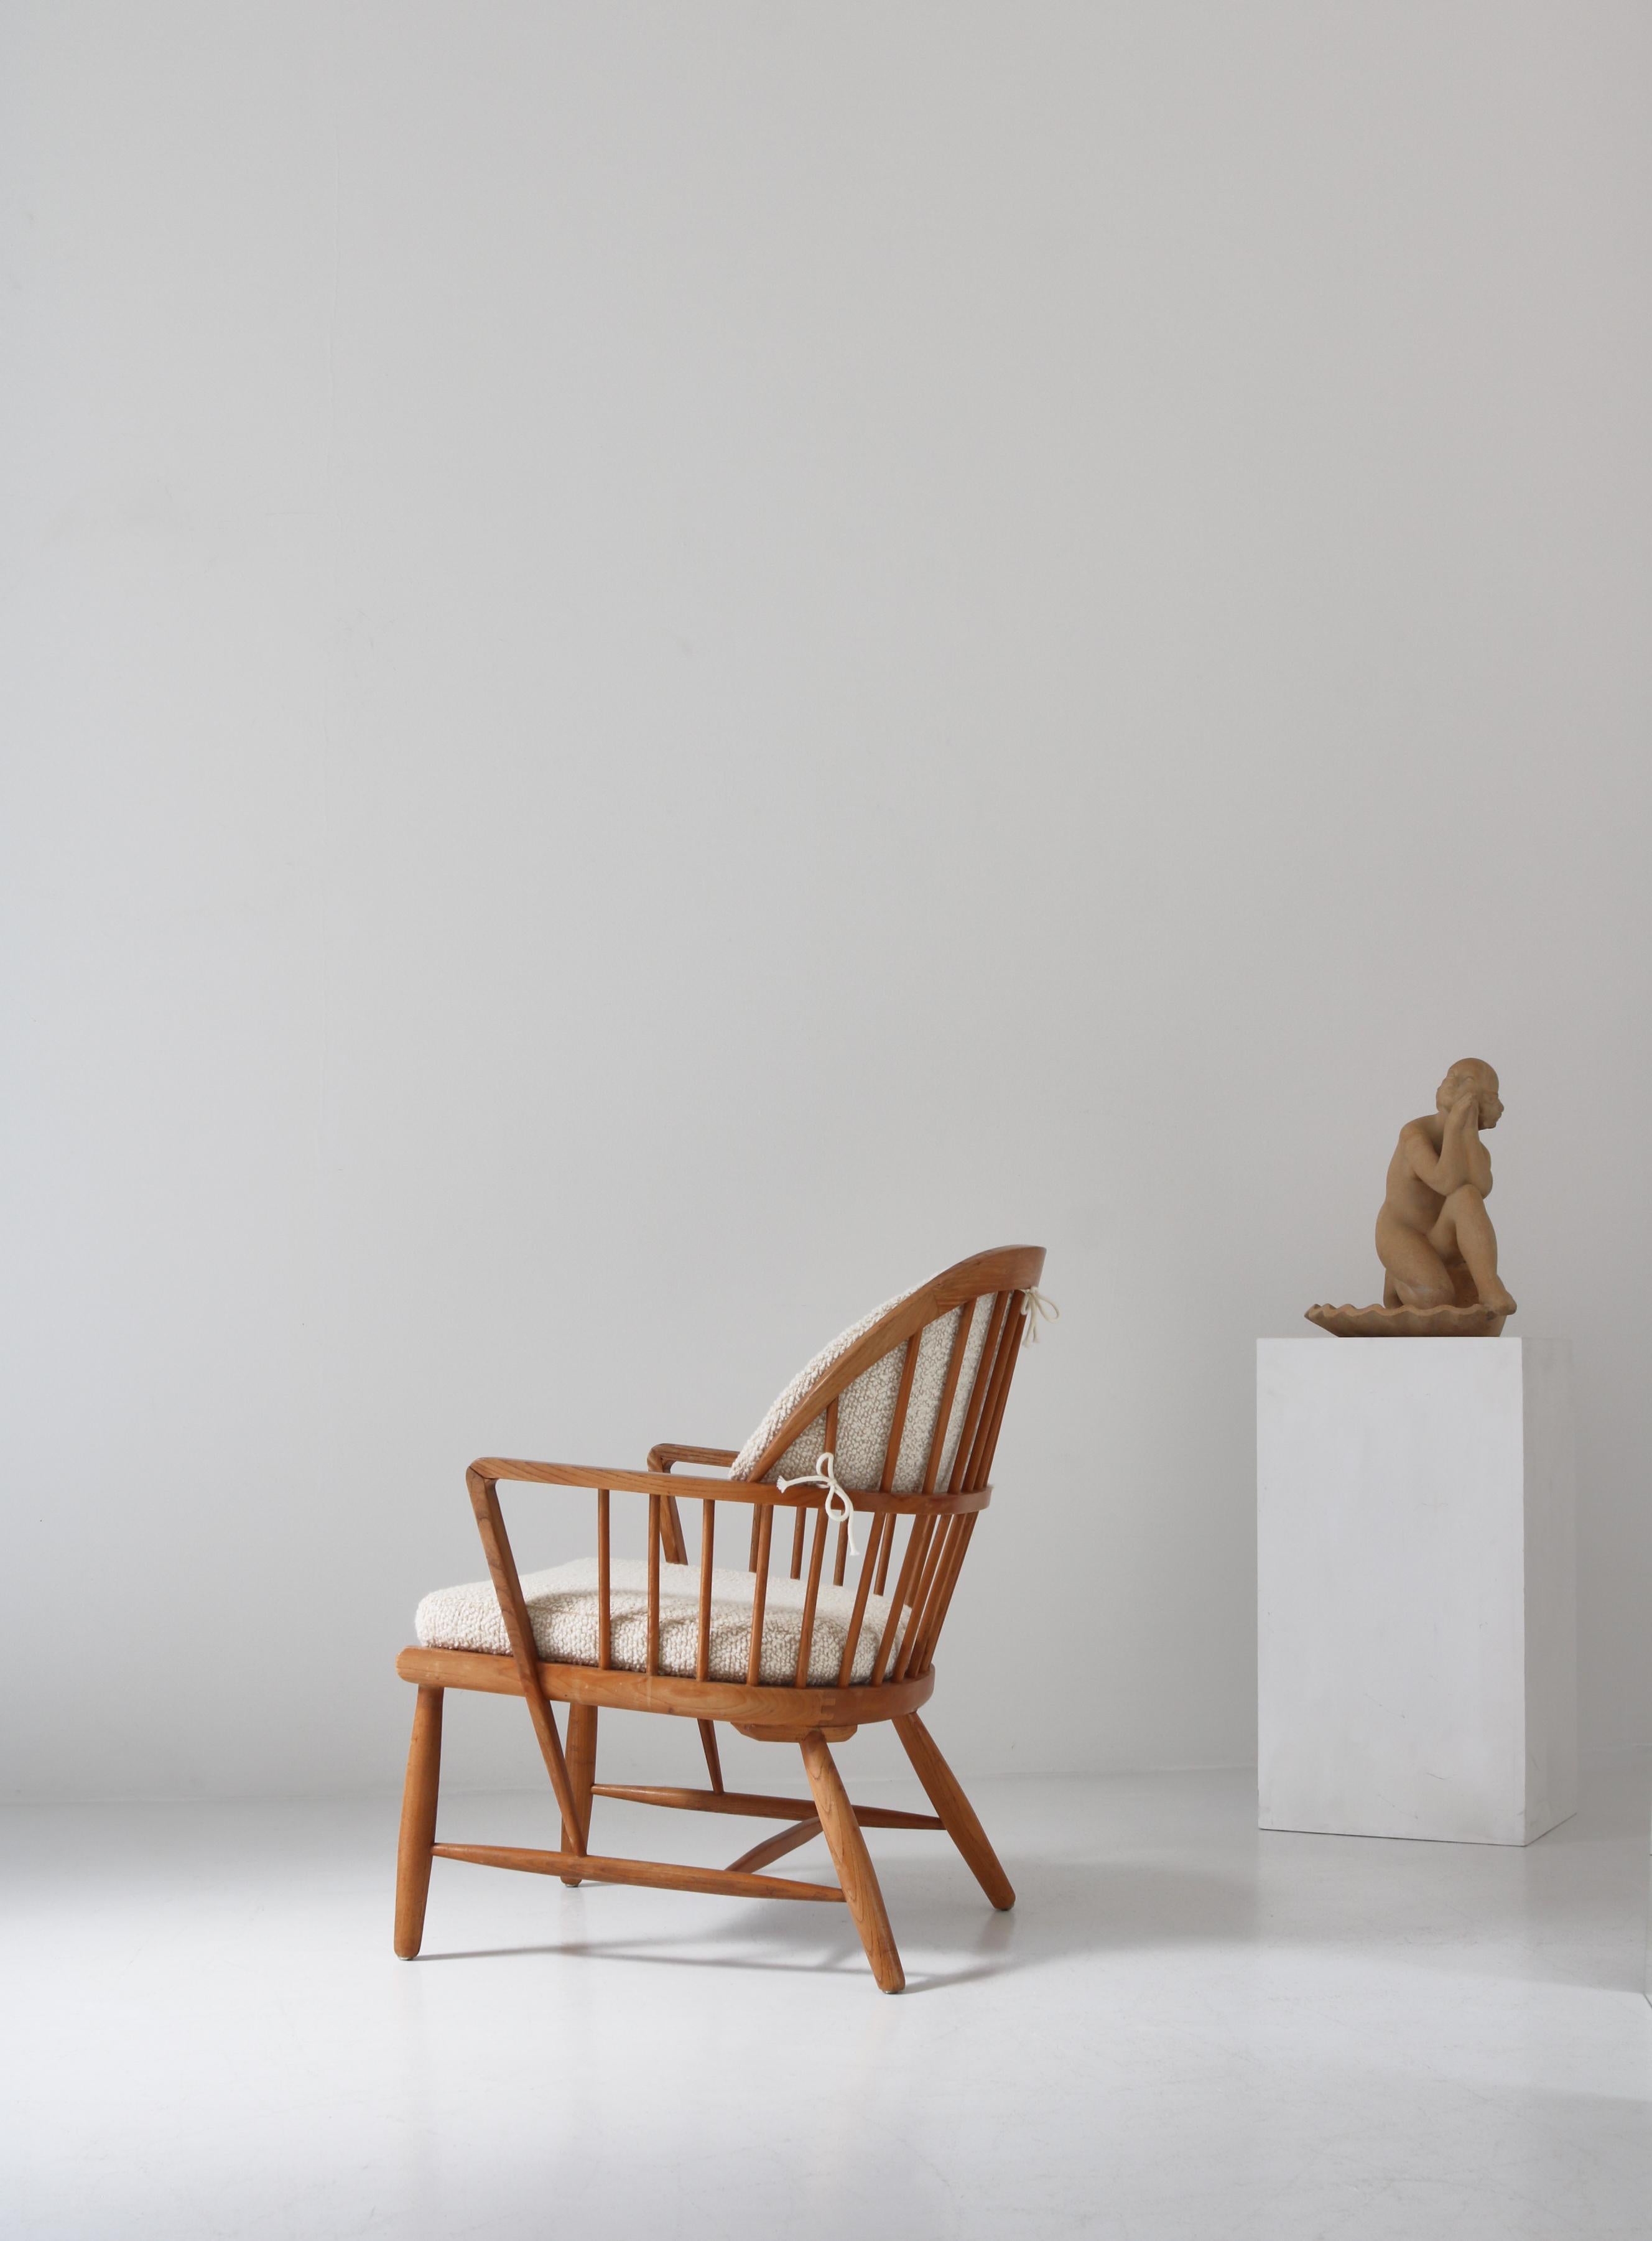 Danish Scandinavian Modern Windsor Chair in Patinated Ash and White Bouclé, 1940s For Sale